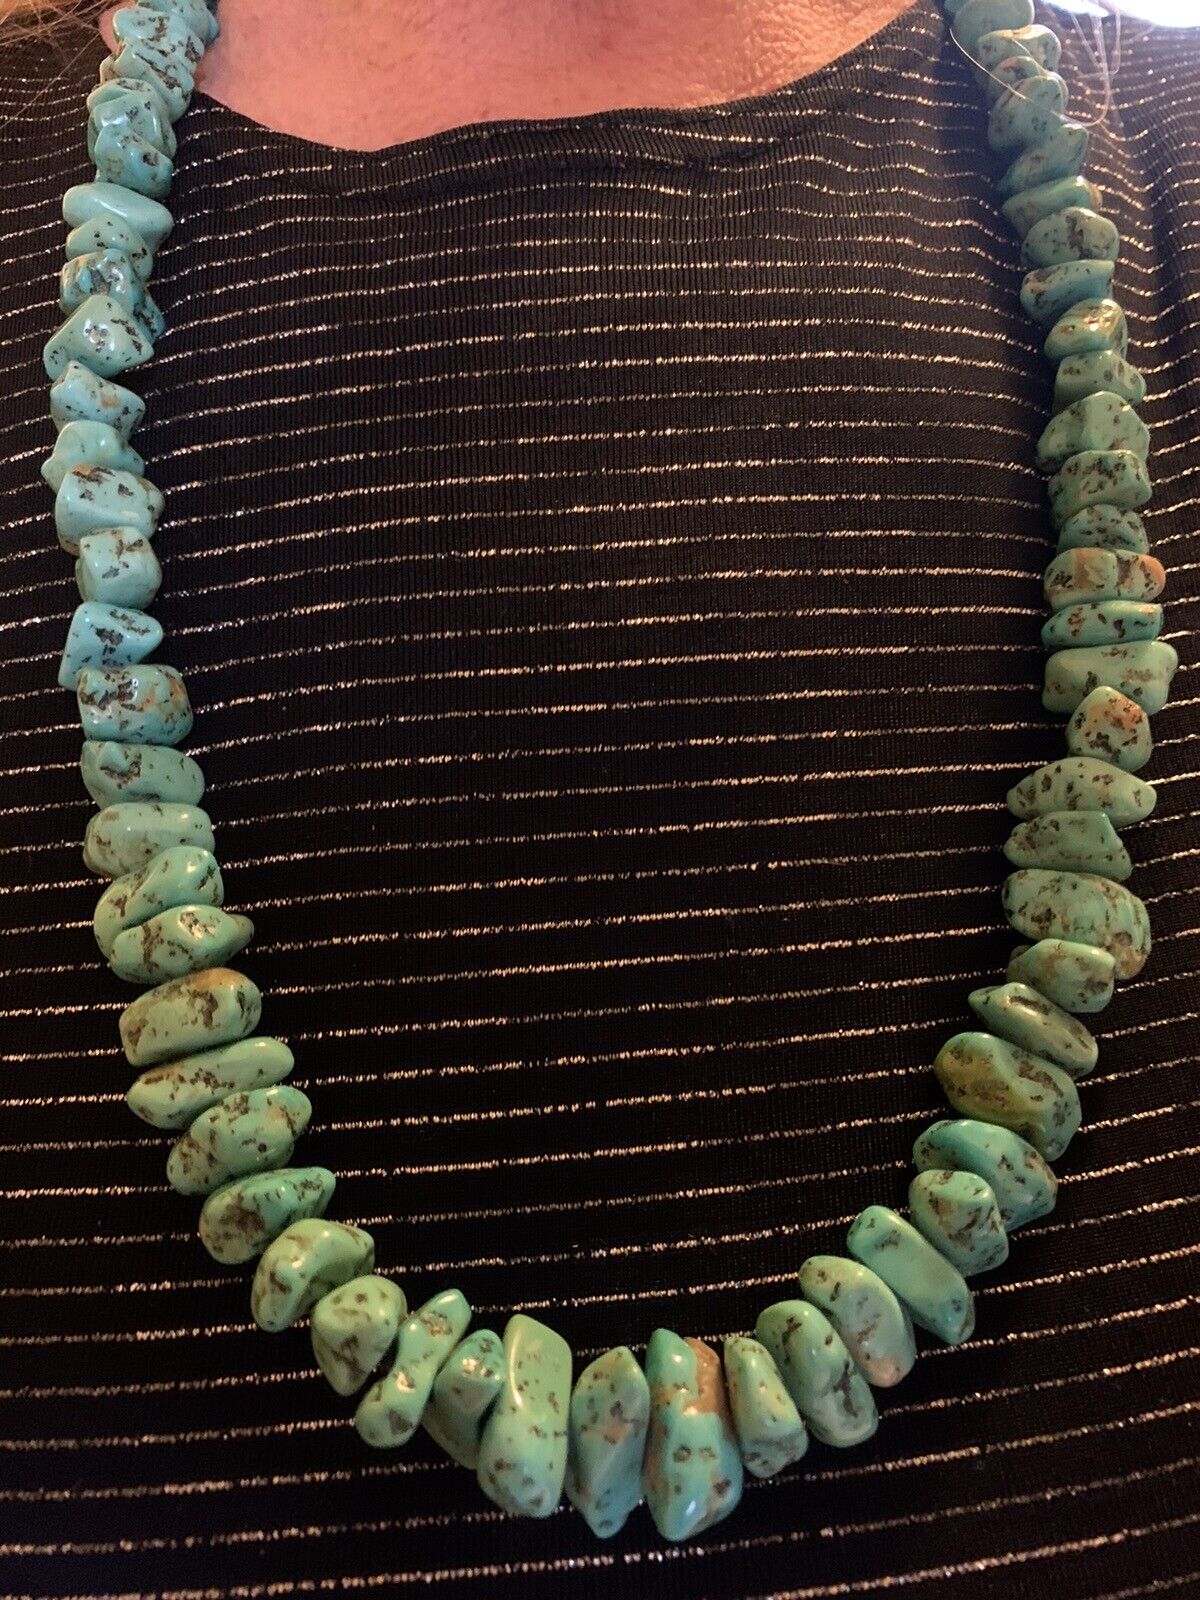 Vintage Grandma Turquoise Necklace Nuggets With Walnut Shells Beads 29” Long,